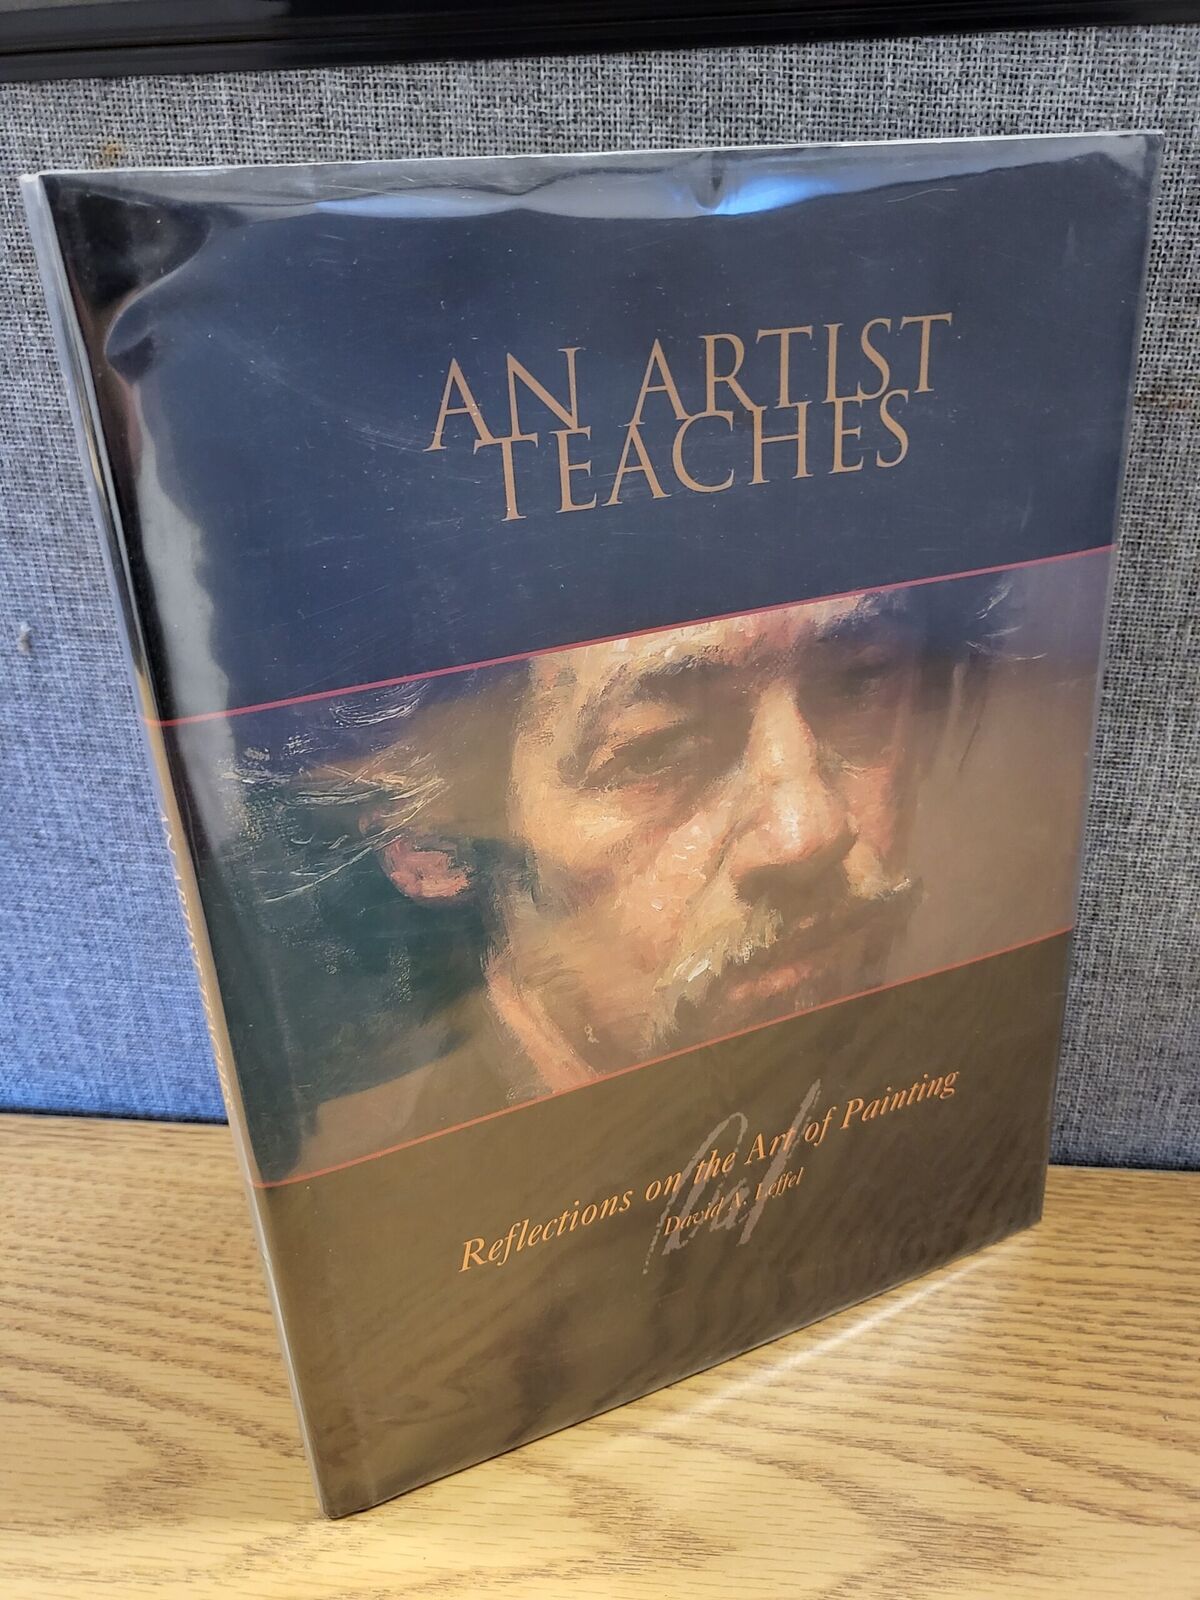 An Artist Teaches: Reflections on the Art of Painting signed